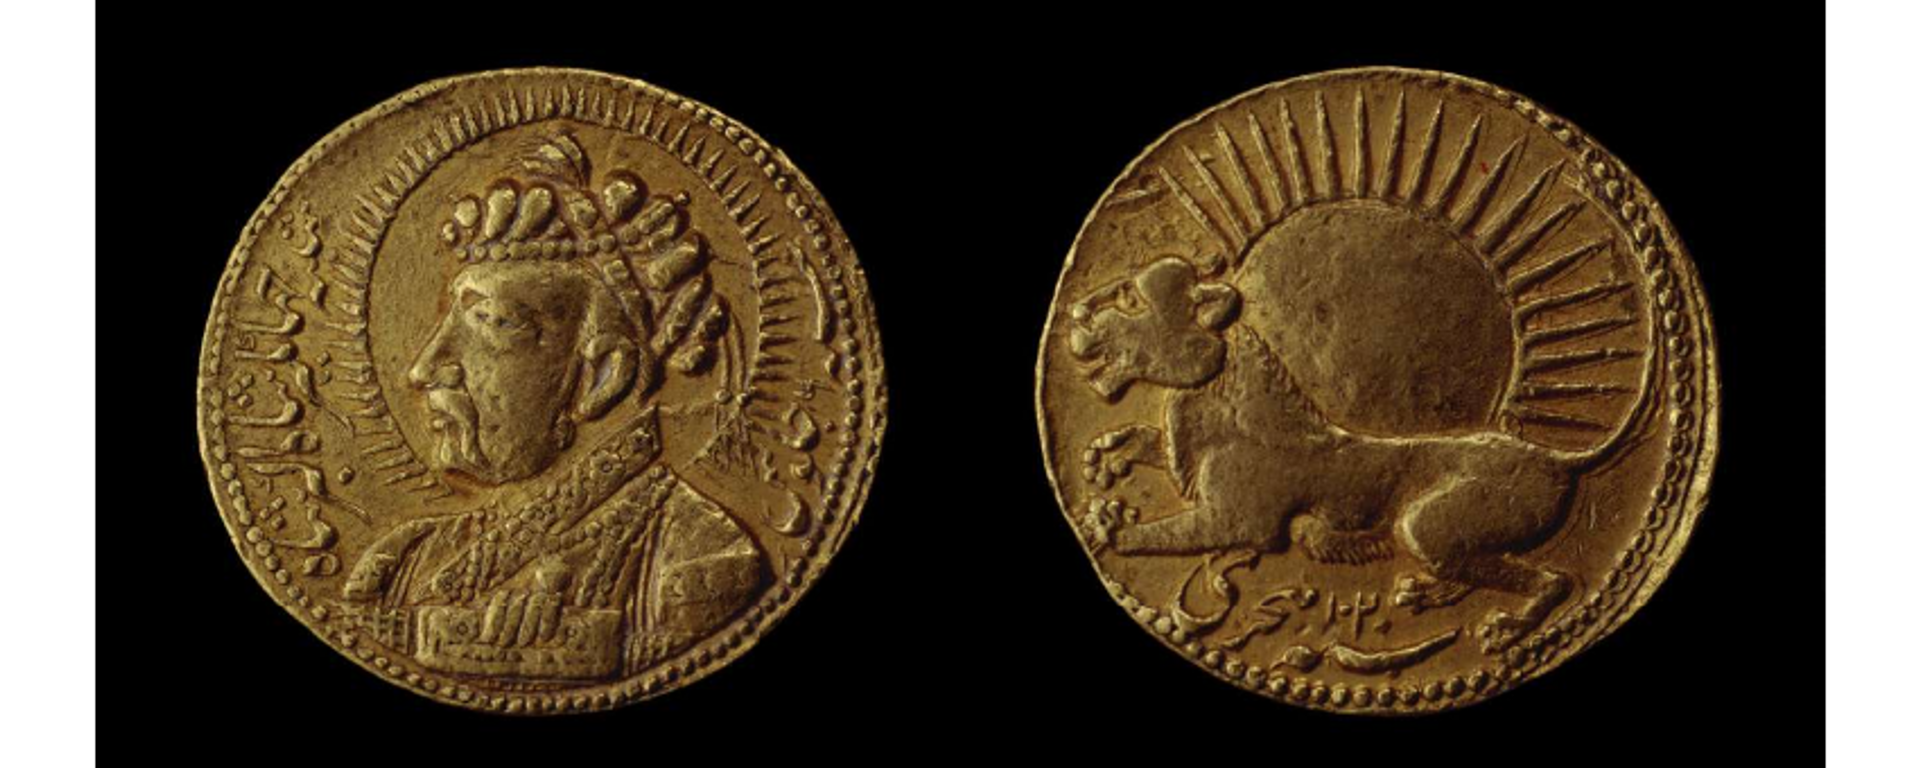 The world's biggest gold coin with a portrait of Jahangir (obverse) and an image of a lion surmounted by the sun (reverse). - Sputnik International, 1920, 27.06.2022